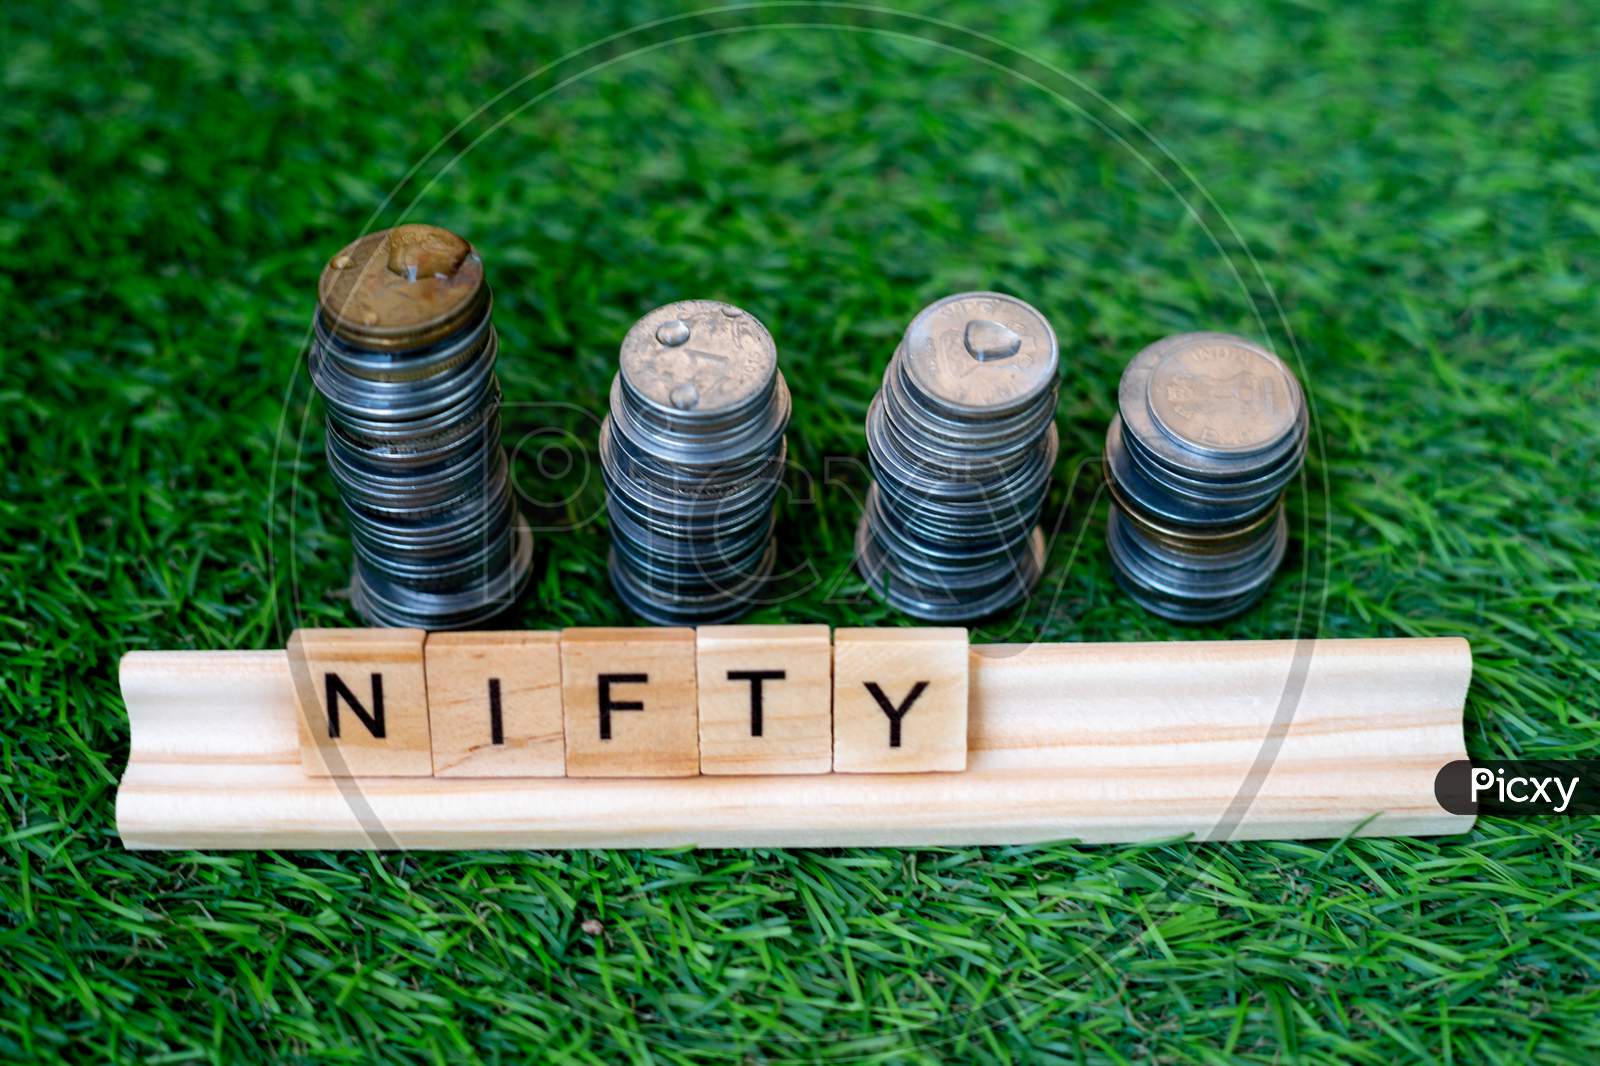 Wooden Blocks With Nifty Written On Them With A Growing Stack Of Coins Behind It Sitting On Grass